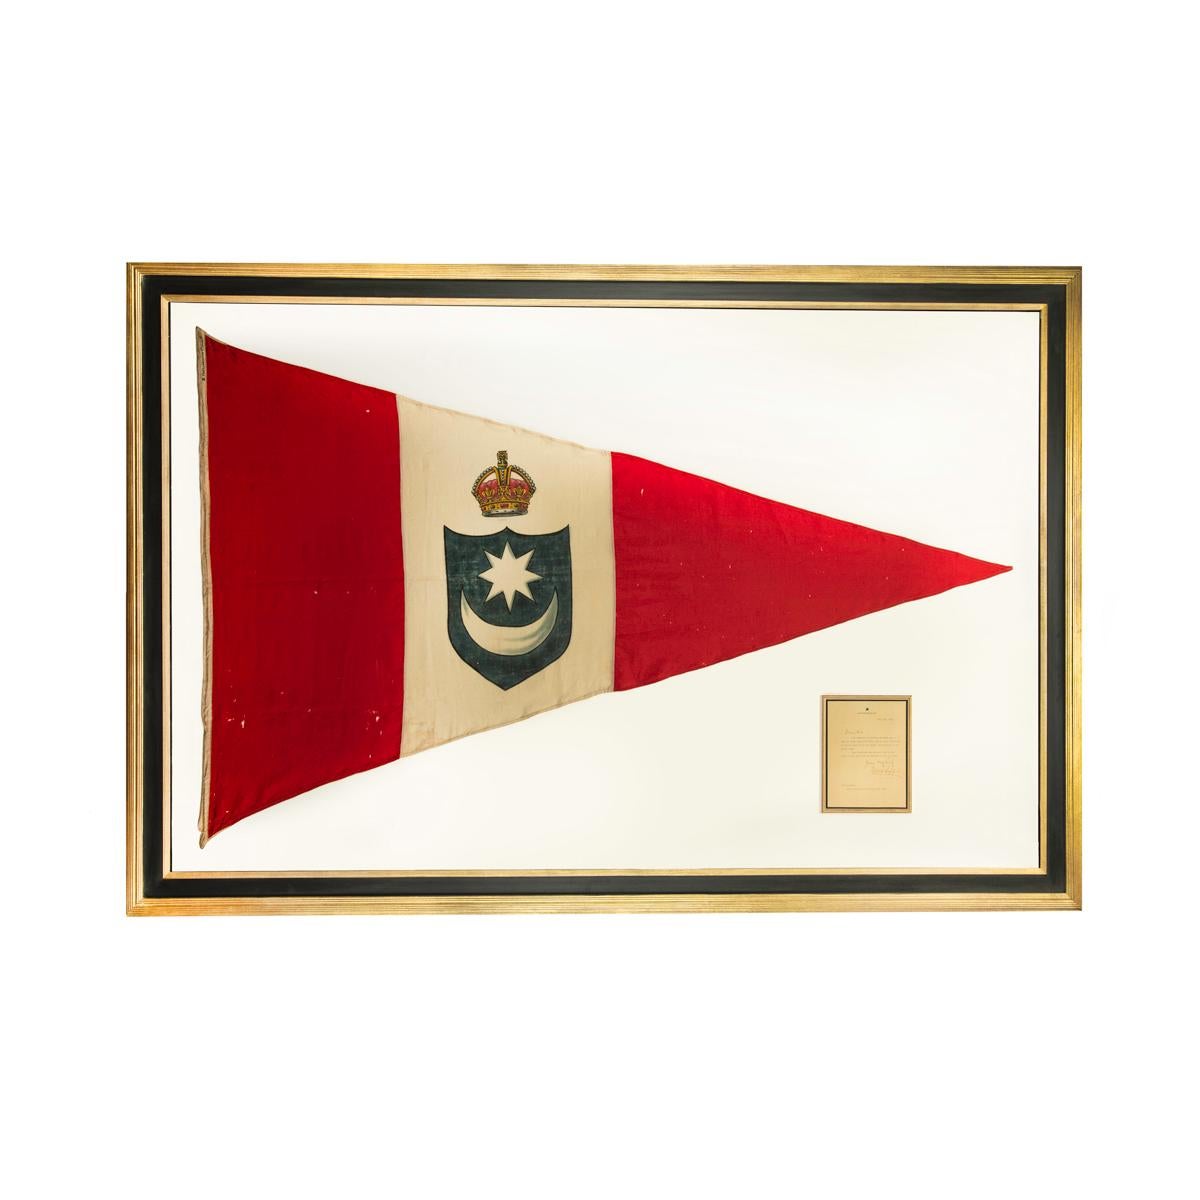 This large triangular racing burgee is made from pieced wool bunting with machine stitching with three vertical red, white and red stripes.  The white stripe showing a blue shield with a white star and crescent moon motif below a royal crown.  The